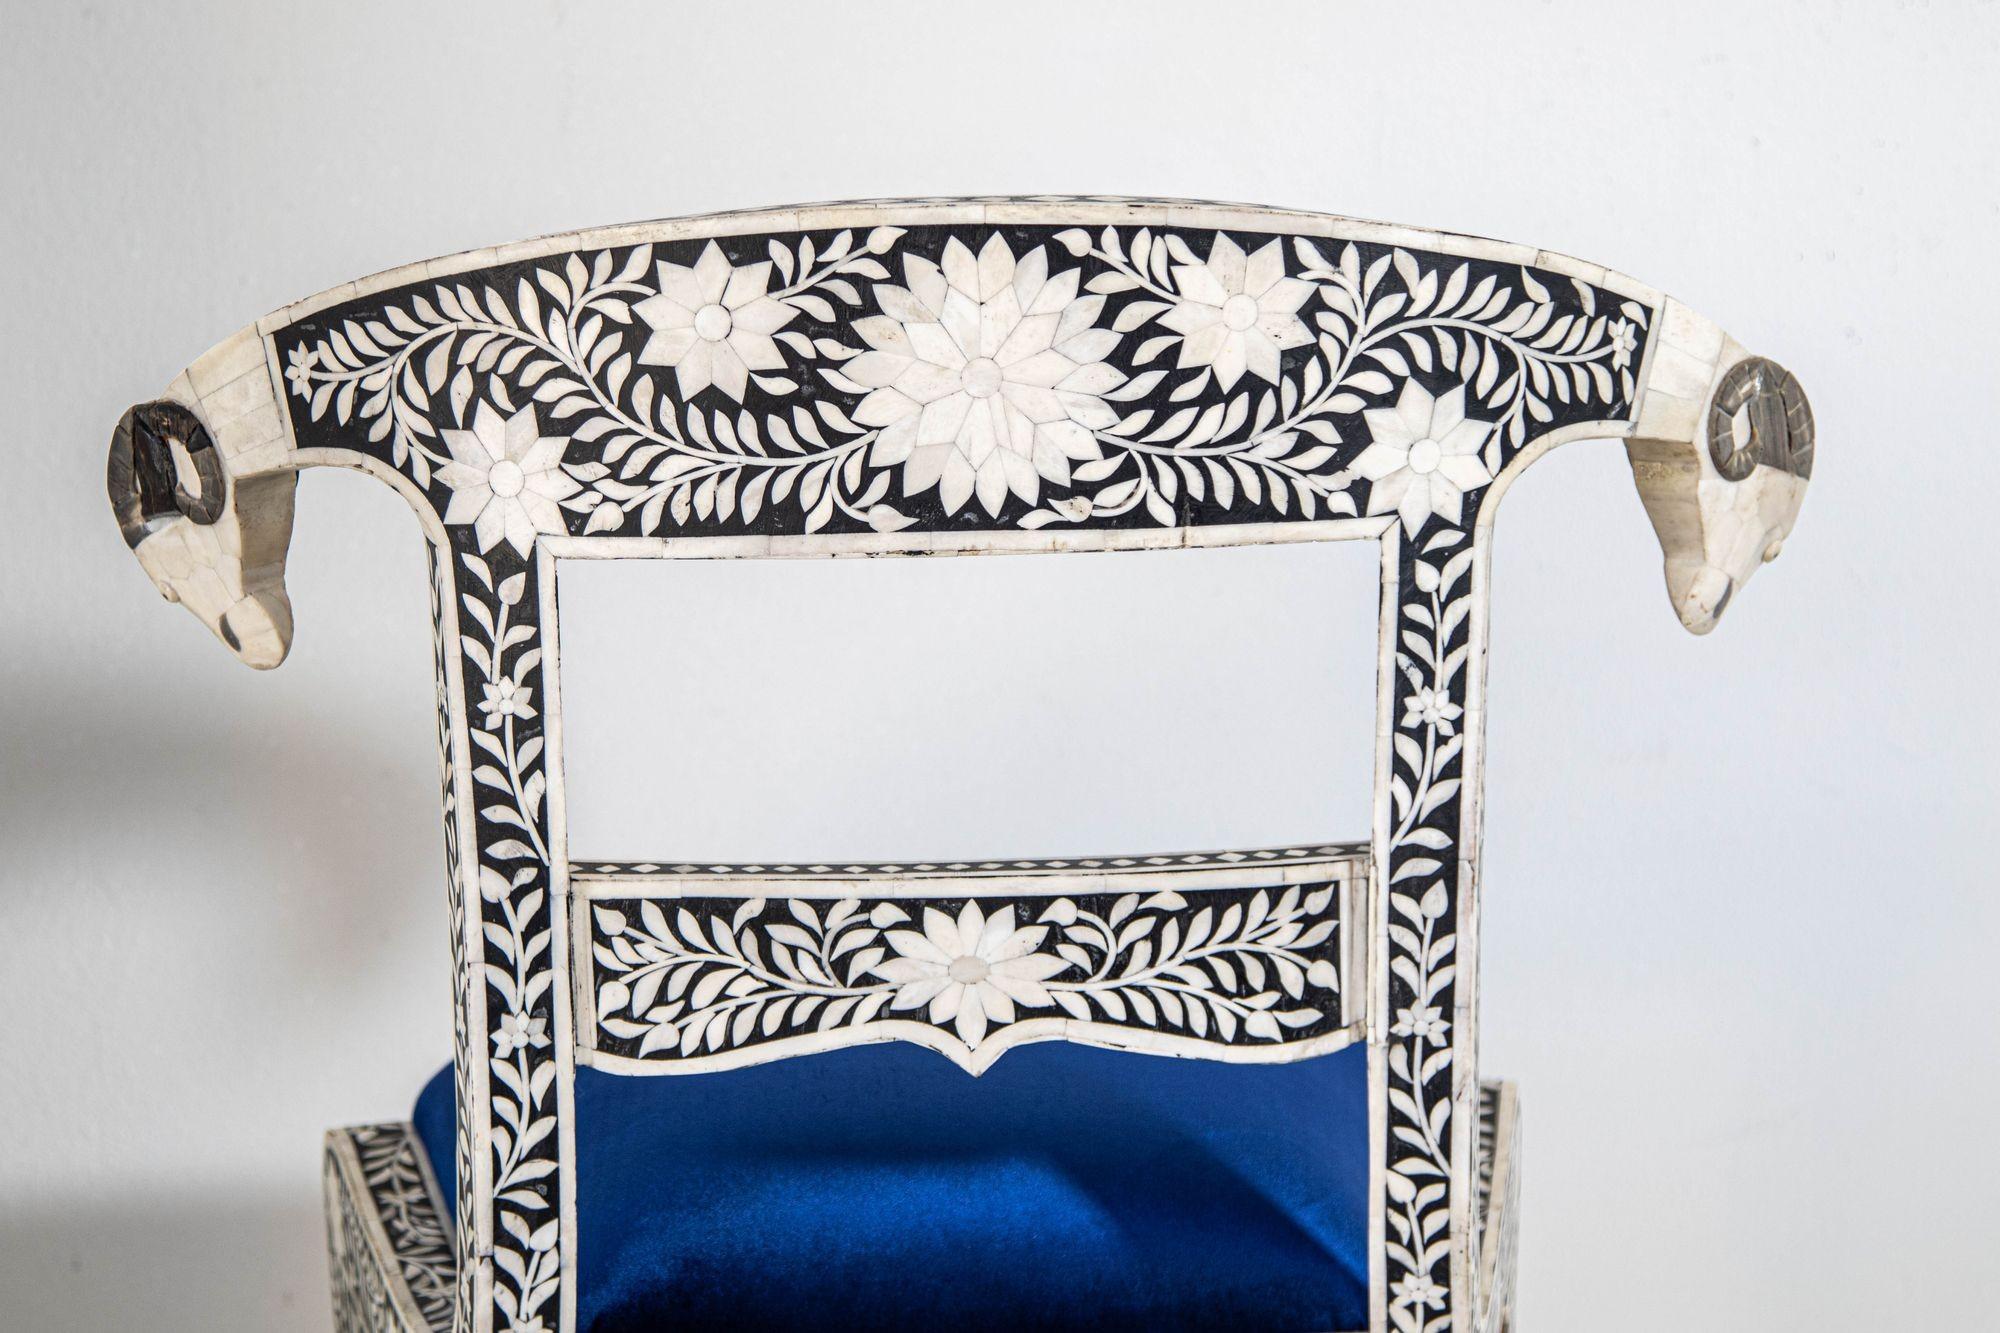 Antique Anglo-Indian Side Chairs with Ram's Head Bone Inlay Royal Blue Seat Pair For Sale 5